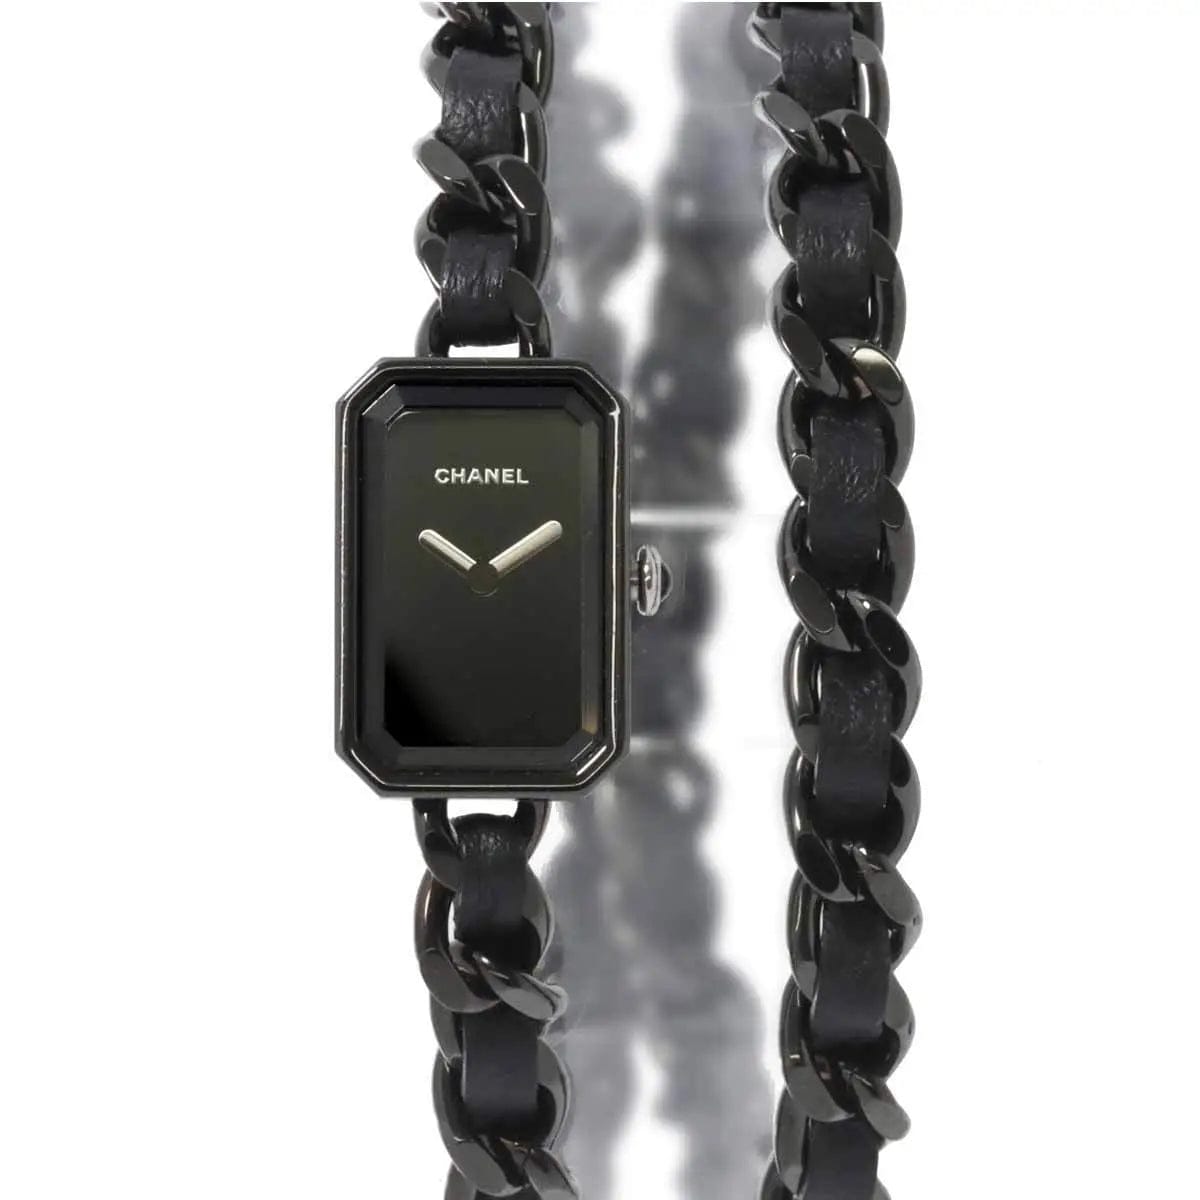 Chanel CHANEL Premiere Rock Limited 1000 Black Dial Watch